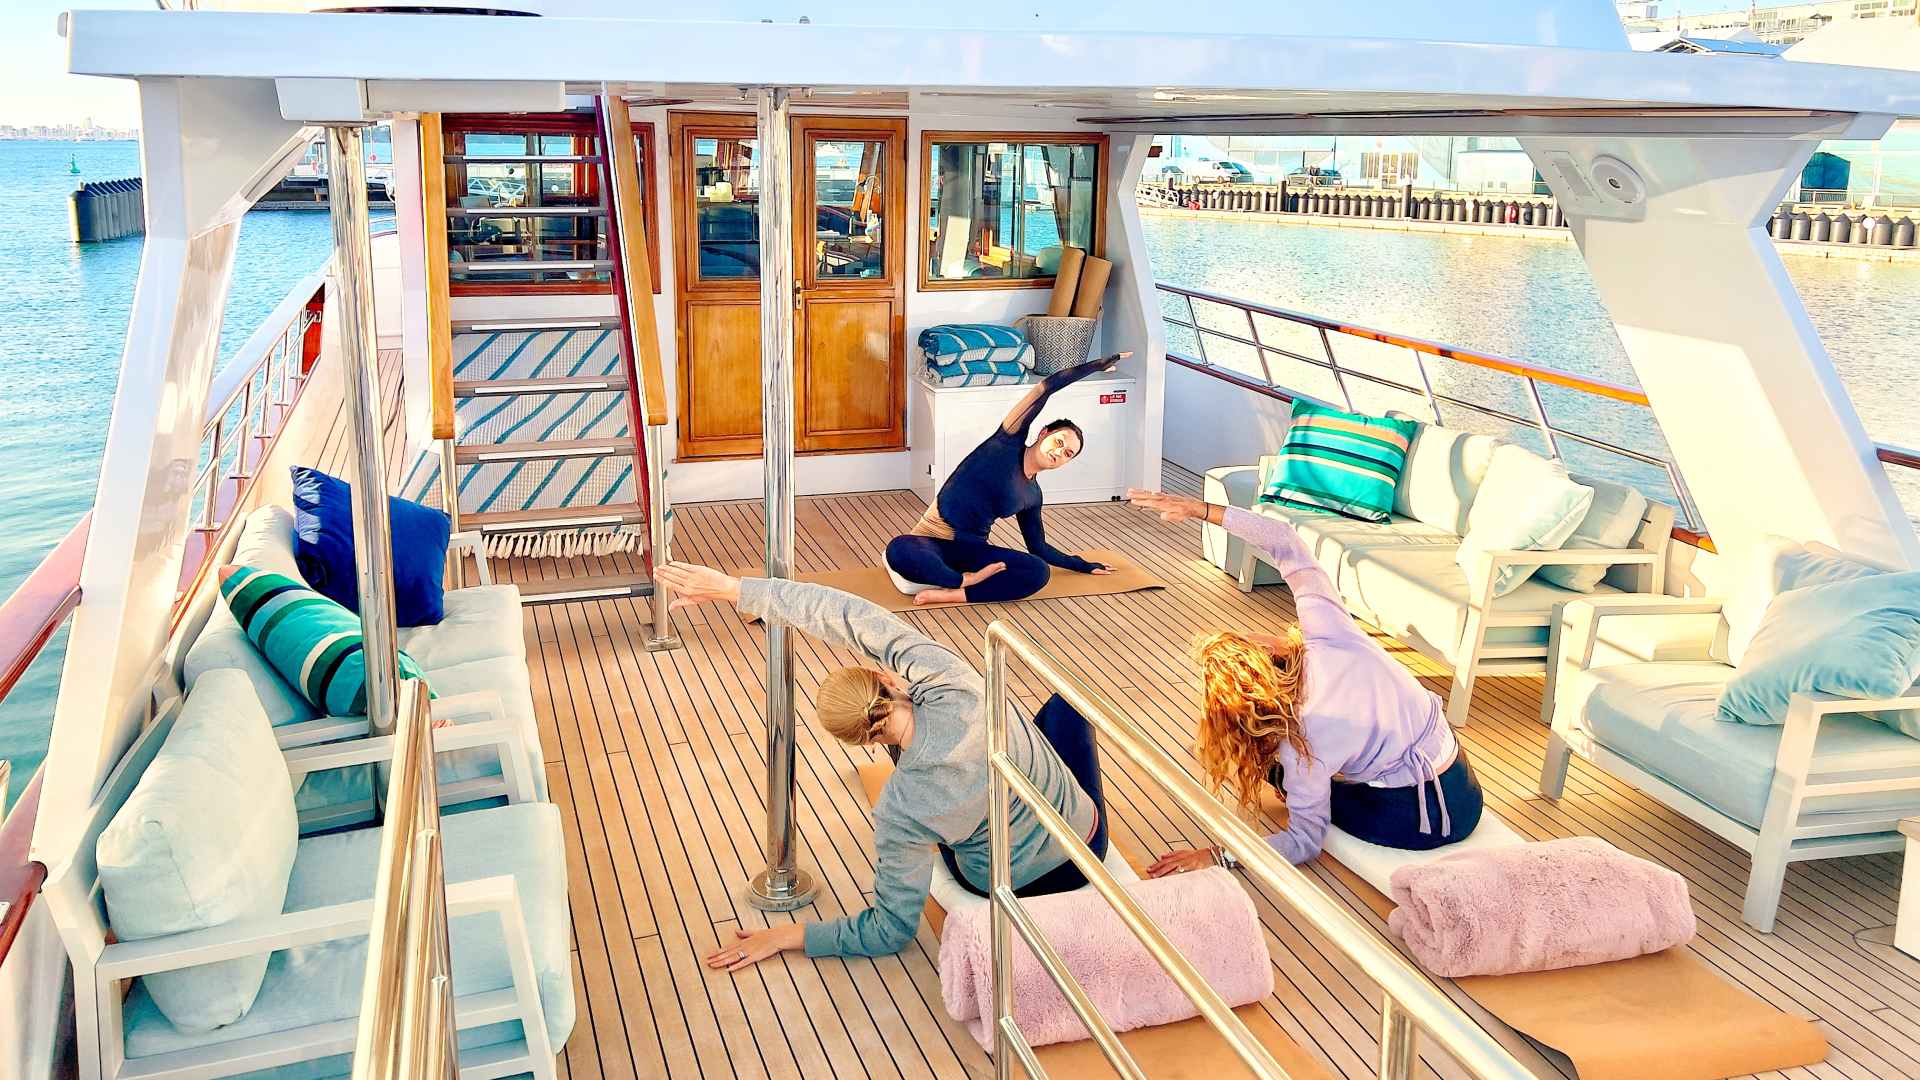 This Wellness Retreat on a Superyacht in Auckland's Harbour Includes Yoga, Massages and a Spa